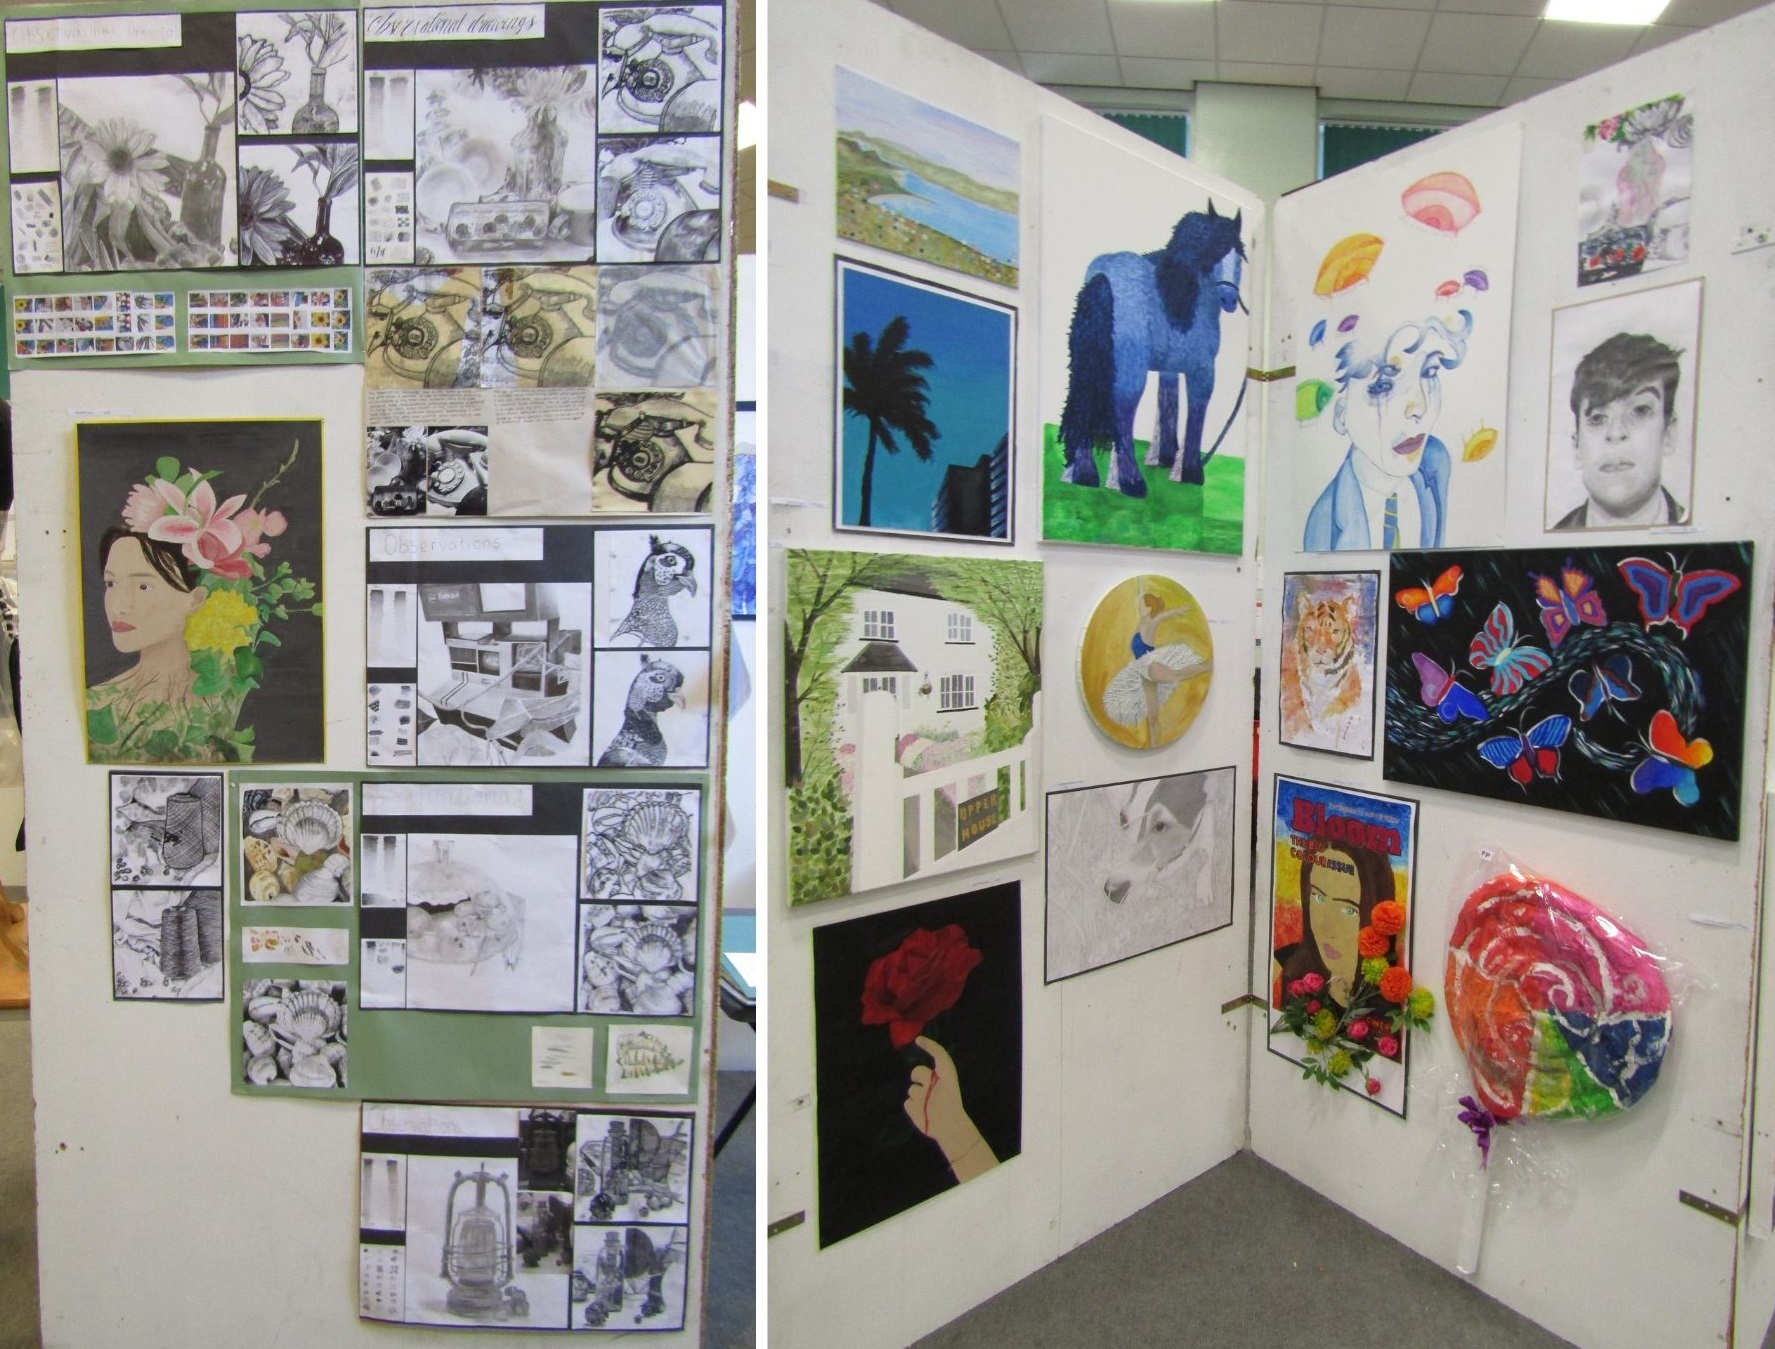 Art show featuring work by students at The Maelor School.